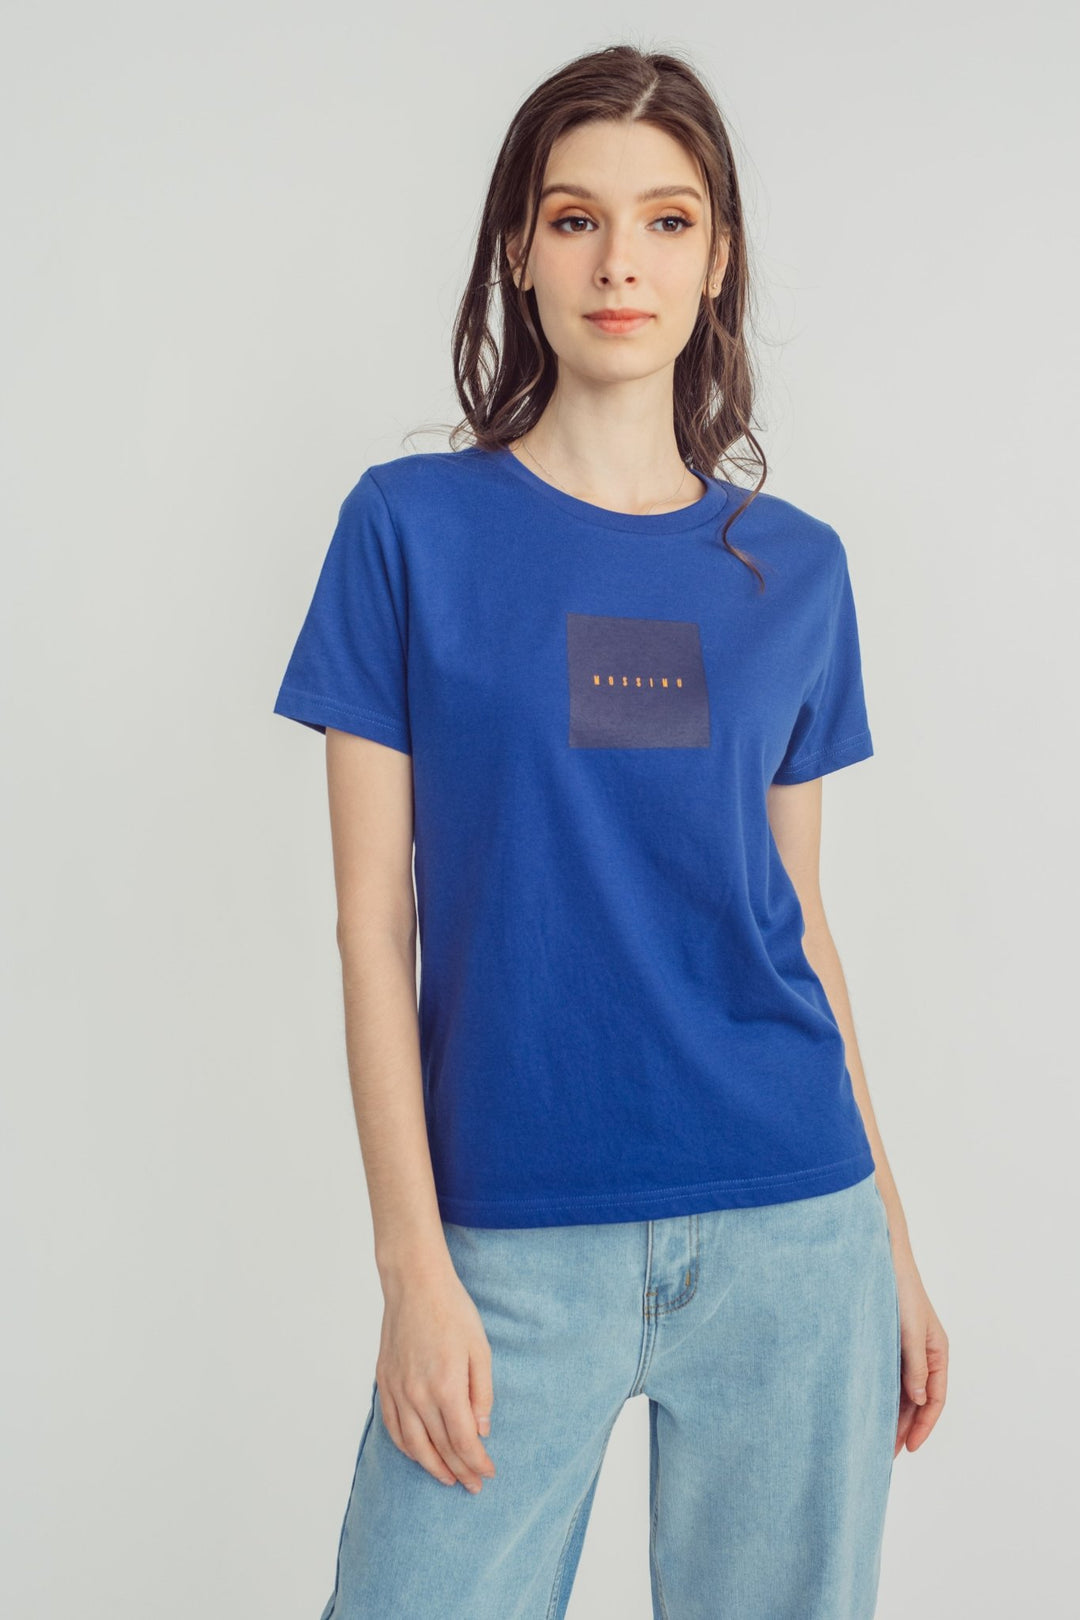 Twilight Blue with Mossimo Boxed Design Classic Fit Tee - Mossimo PH